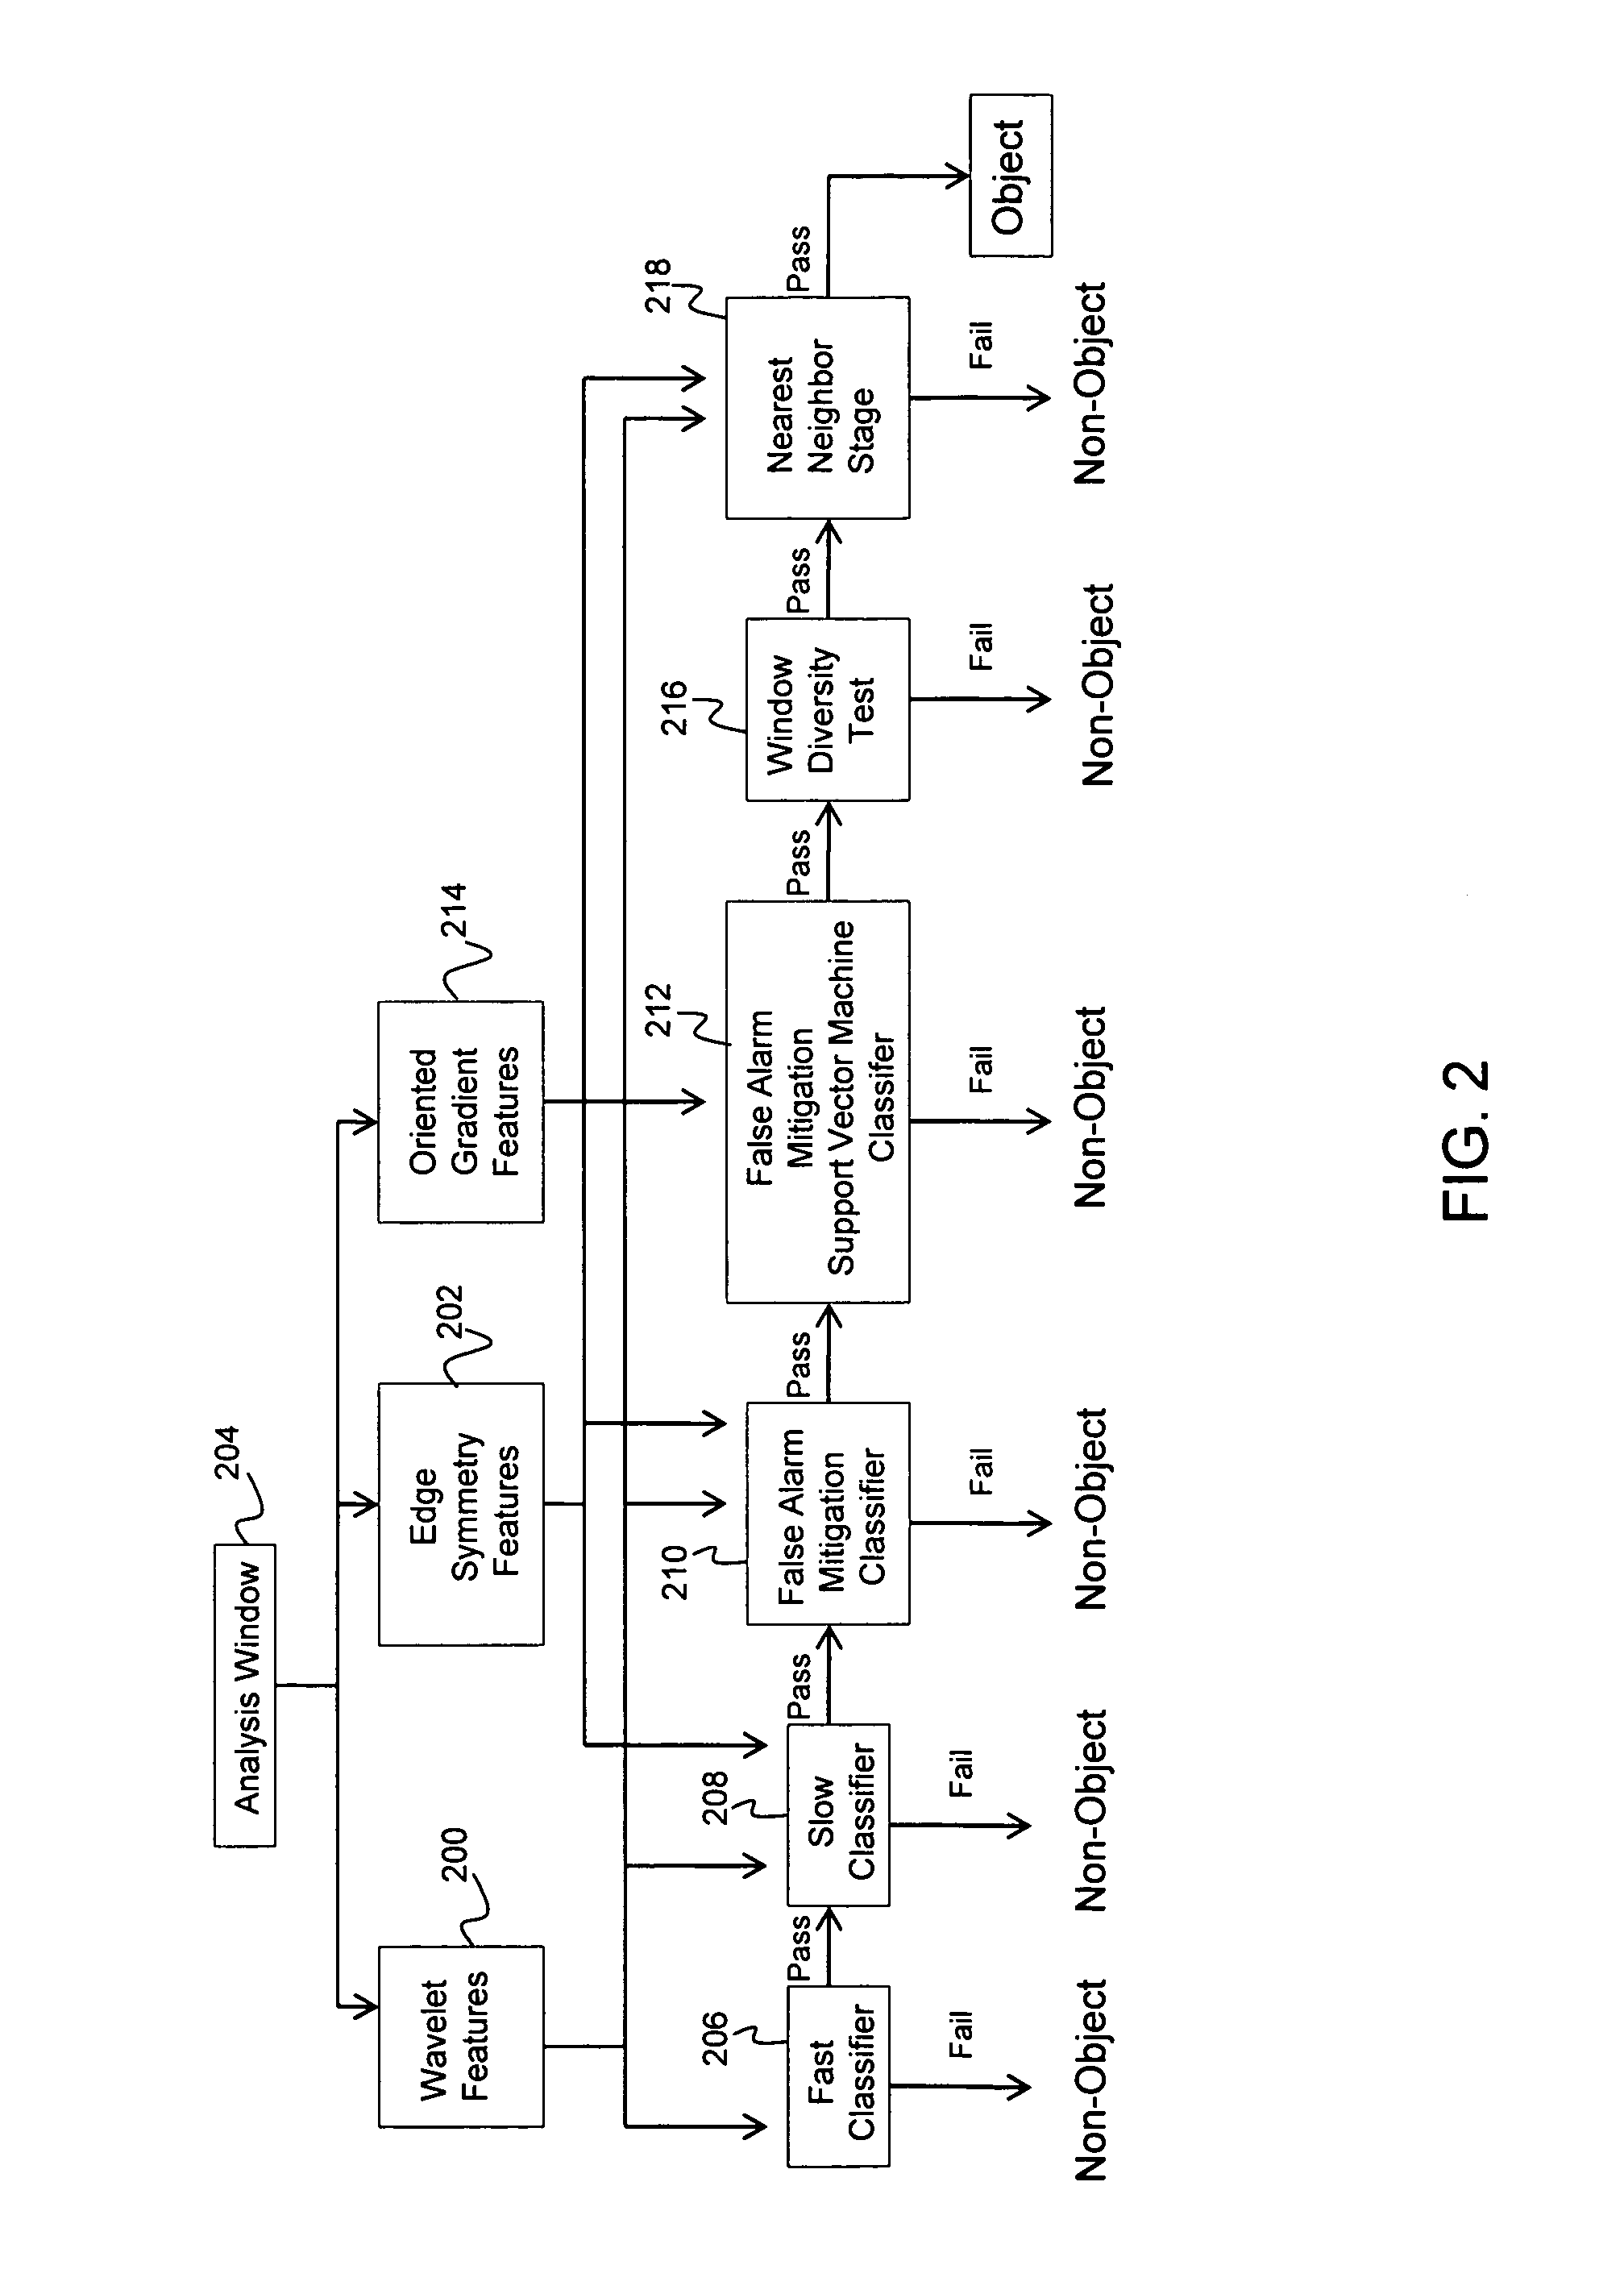 System for visual object recognition using heterogeneous classifier cascades